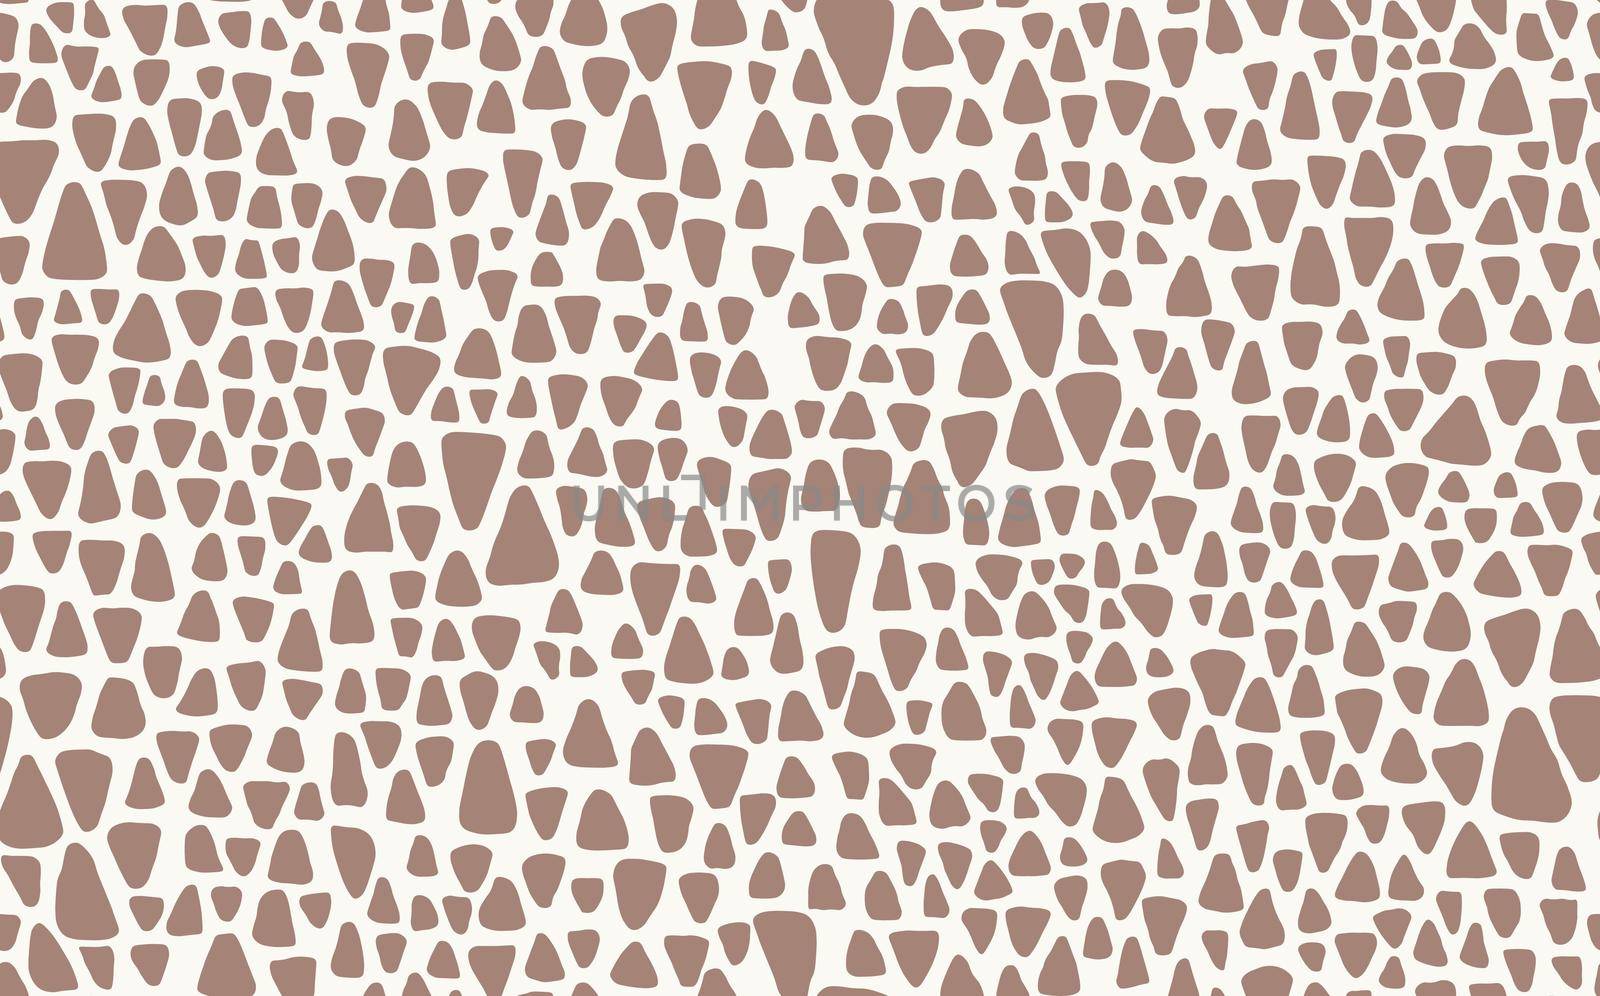 Abstract modern giraffe seamless pattern. Animals trendy background. Colorful decorative vector stock illustration for print, card, postcard, fabric, textile. Modern ornament of stylized skin.